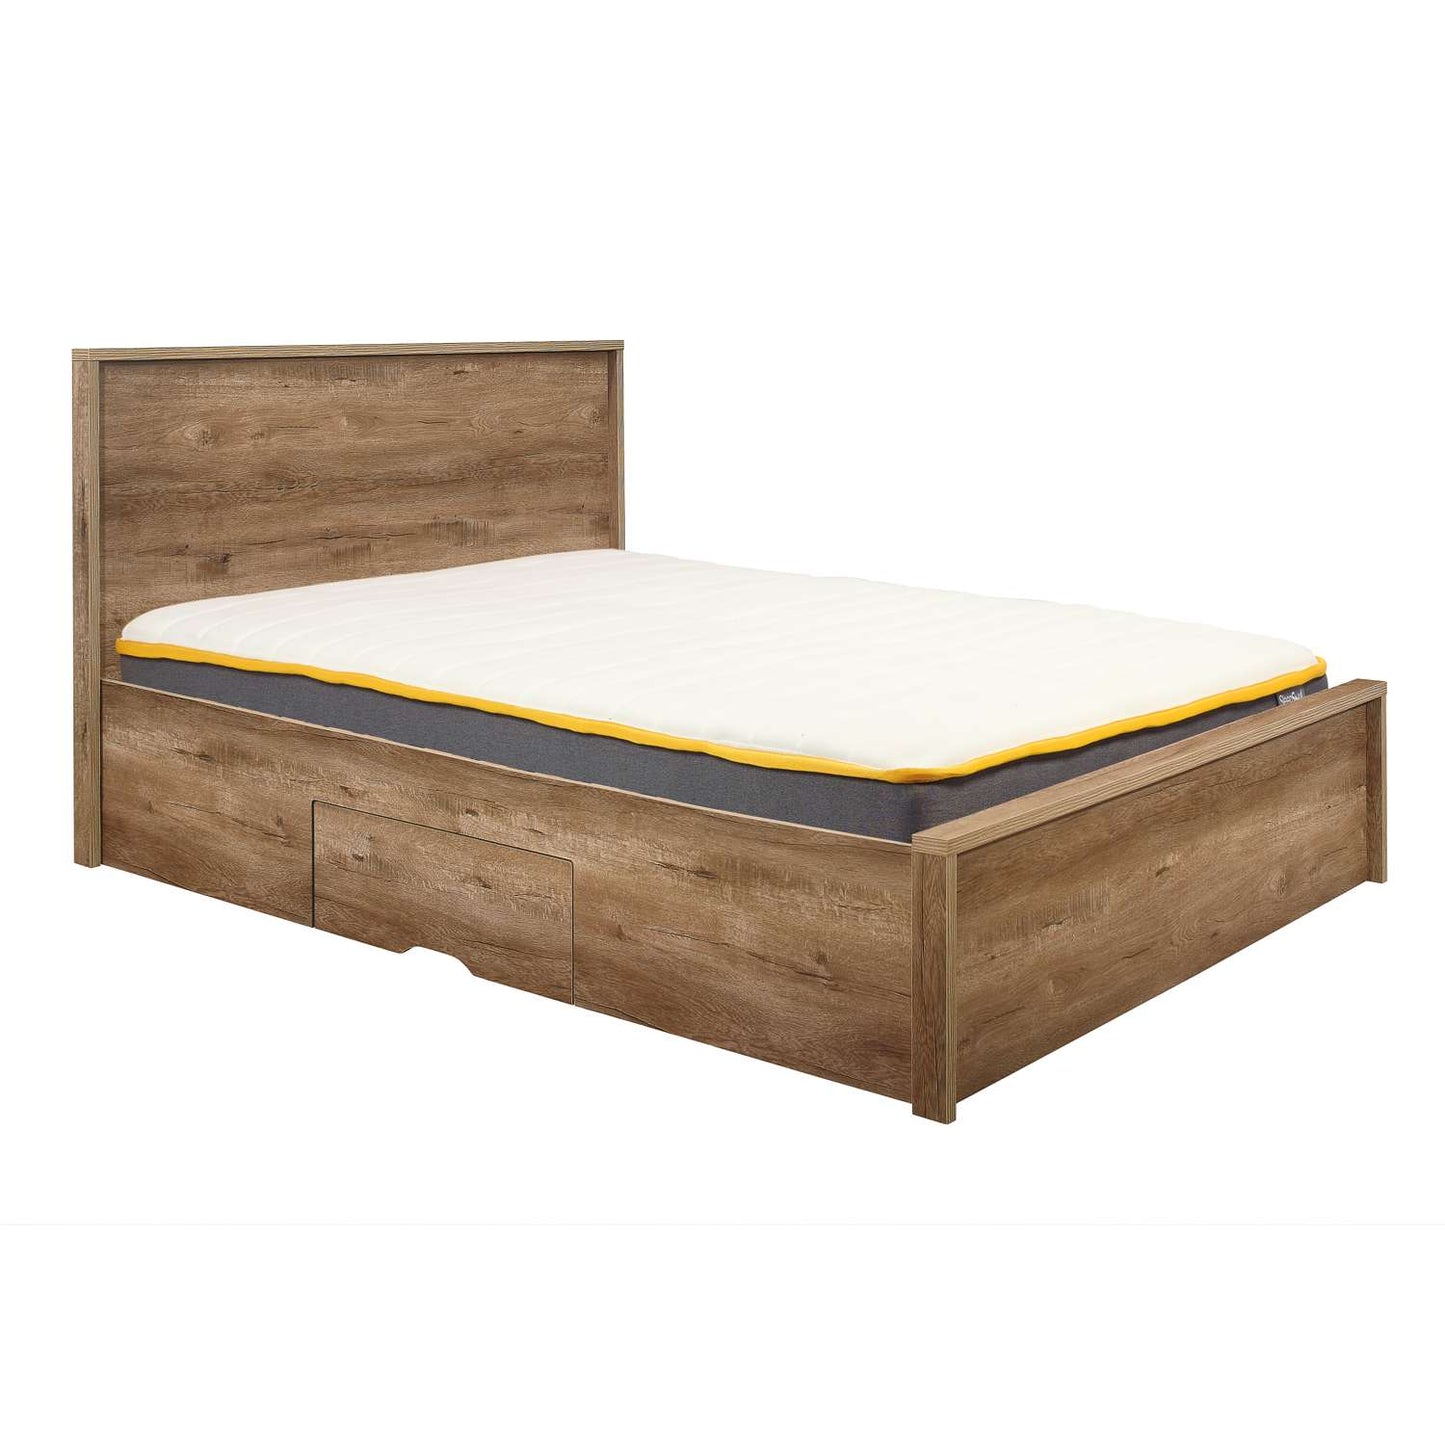 Stockwell 2 Draw Rustic Oak Bed Frame